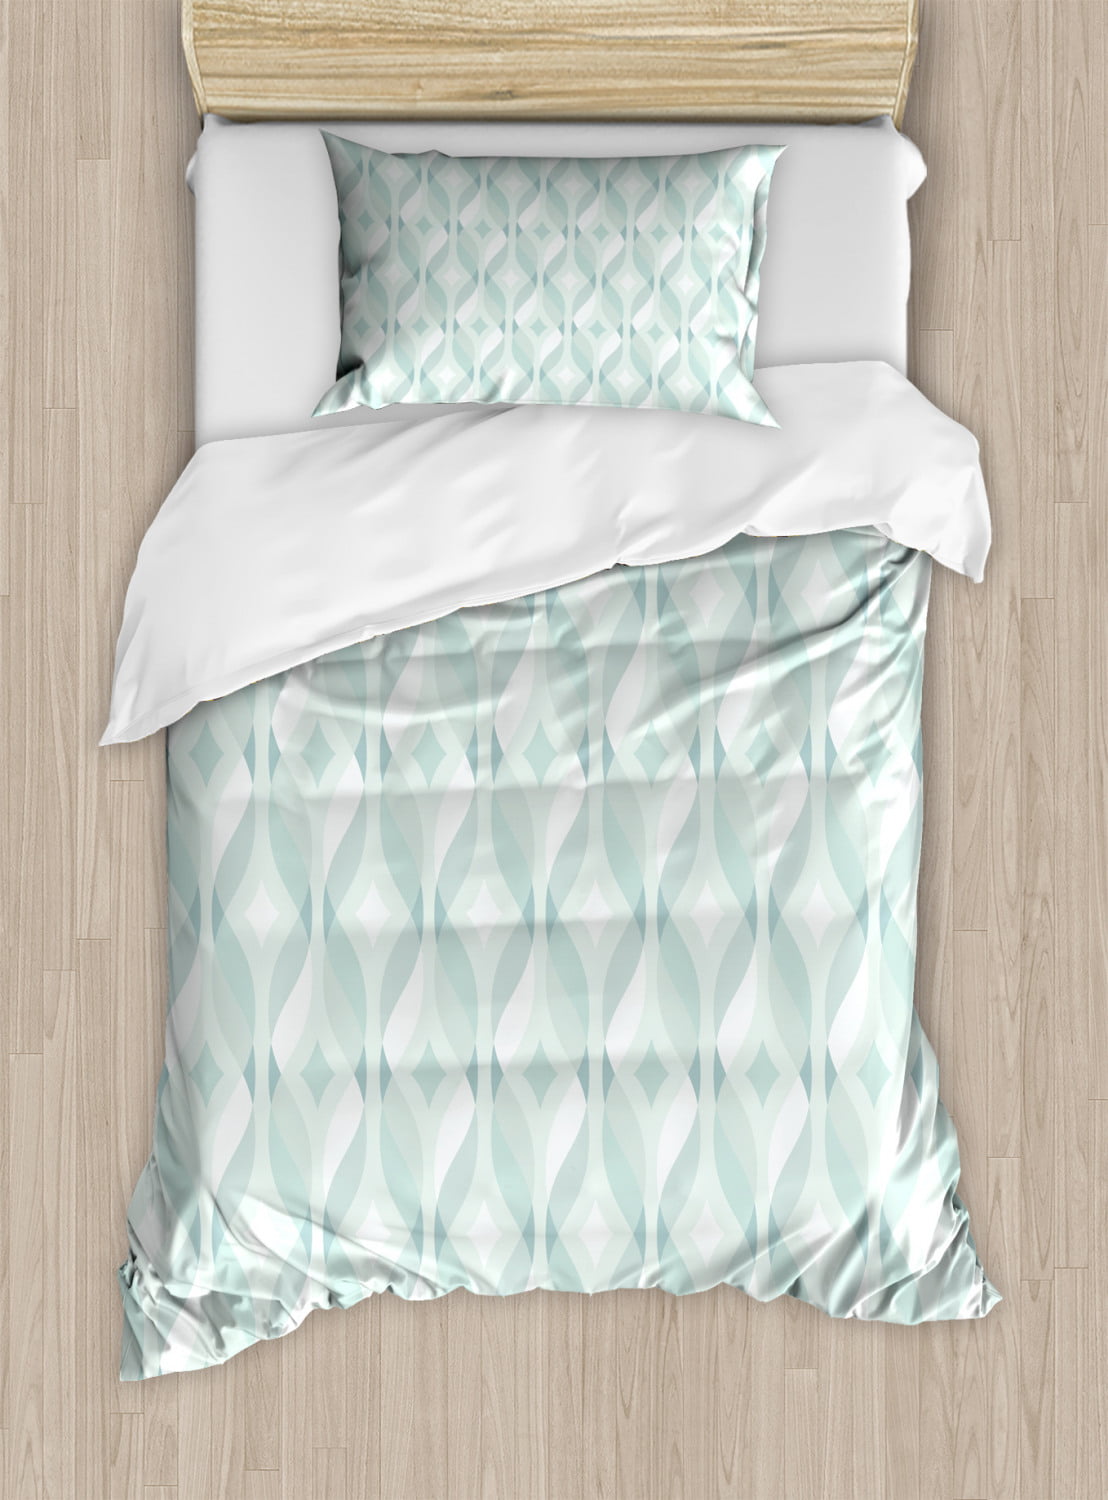 Seafoam Duvet Cover Set Tangled Lines With Rhombus Pattern